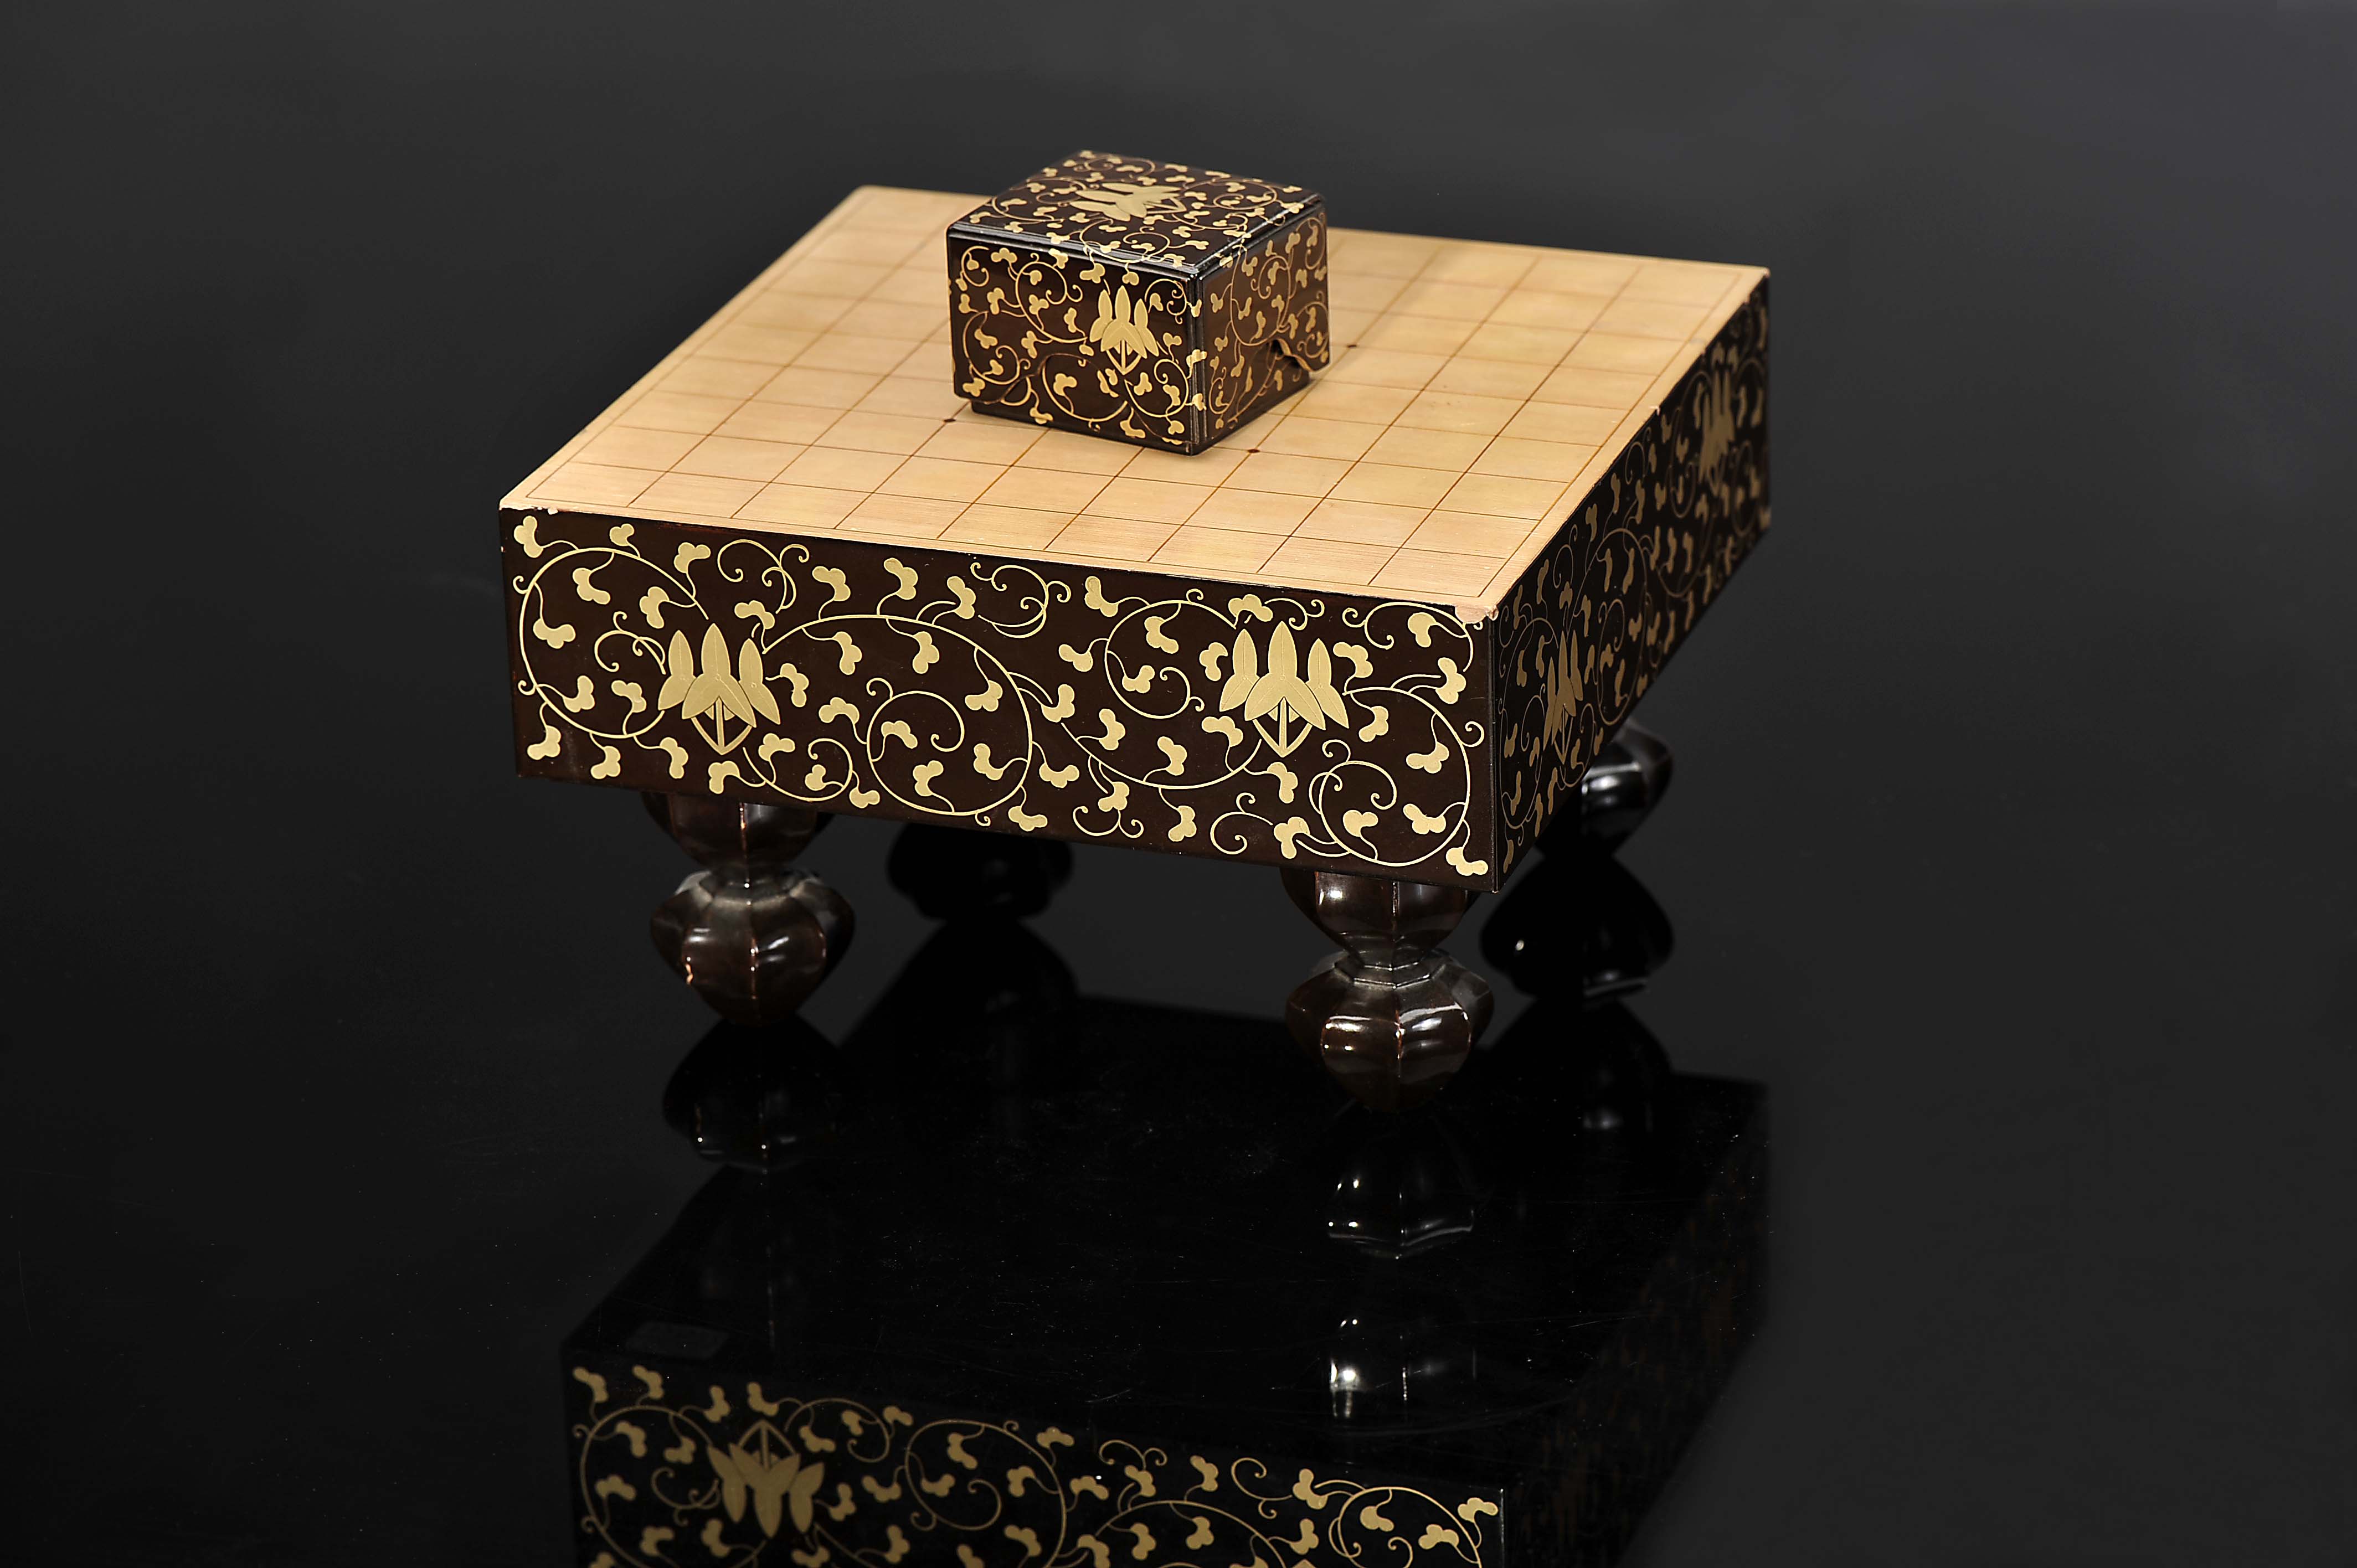 Shogi table/board with forty pieces in "Tomobako" box - Image 17 of 17